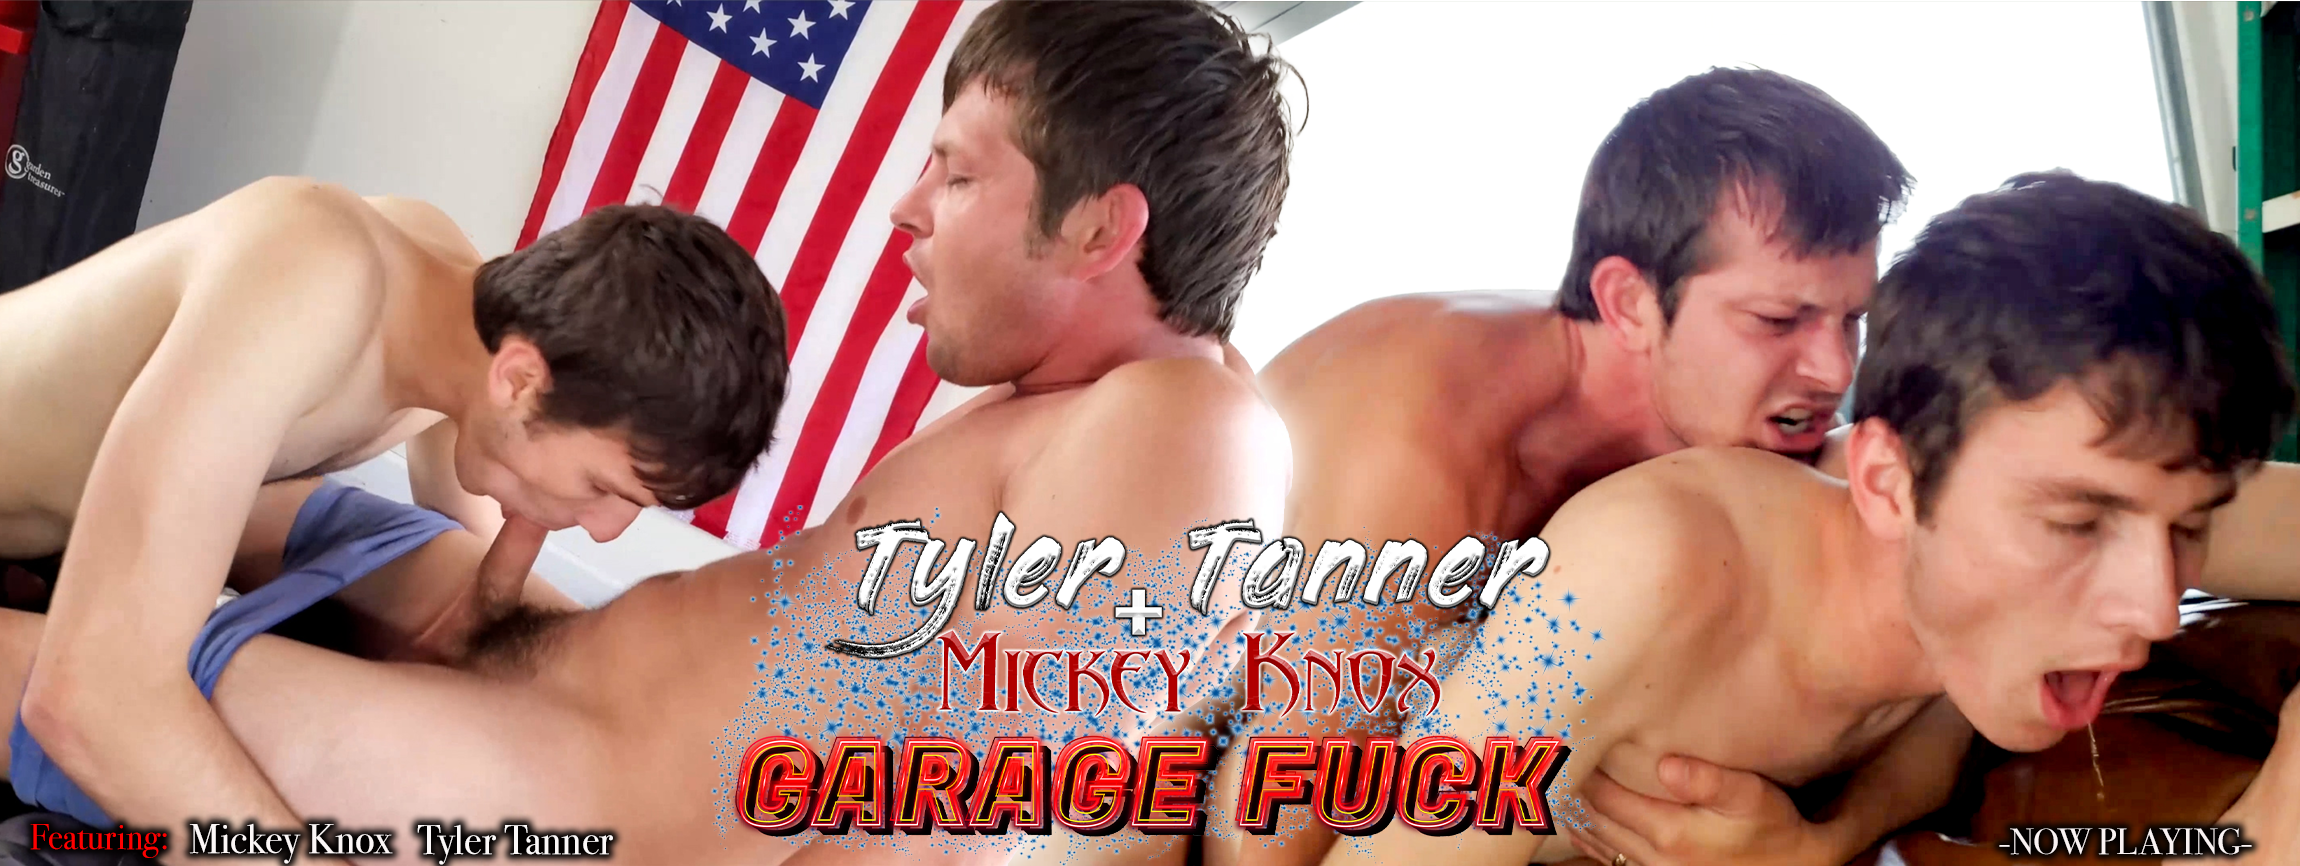 Tyler Tanner and Mickey Knox Garage Fuck -Live-